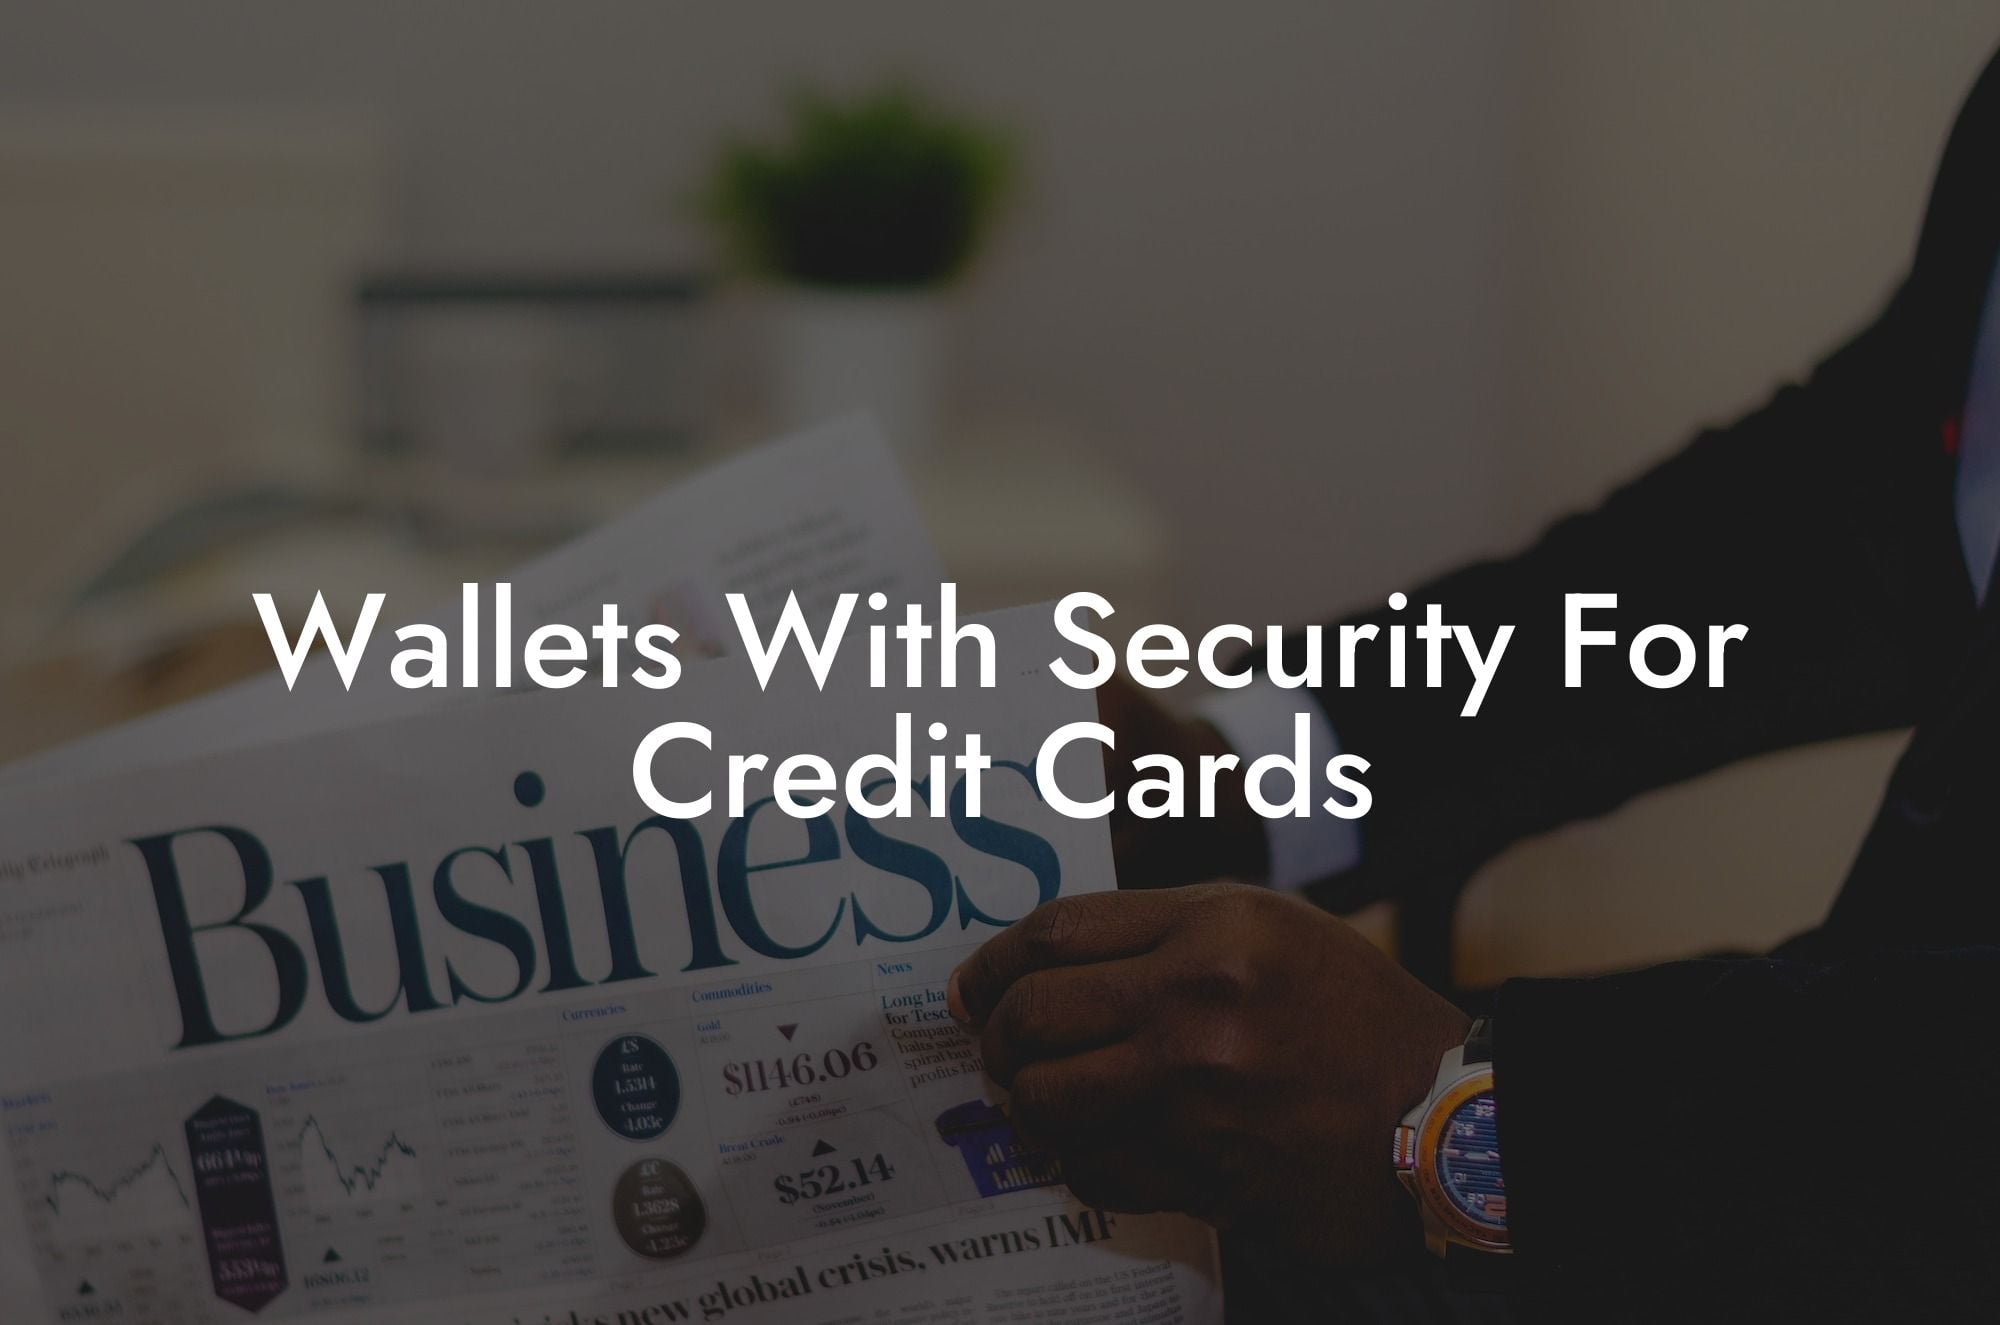 Wallets With Security For Credit Cards